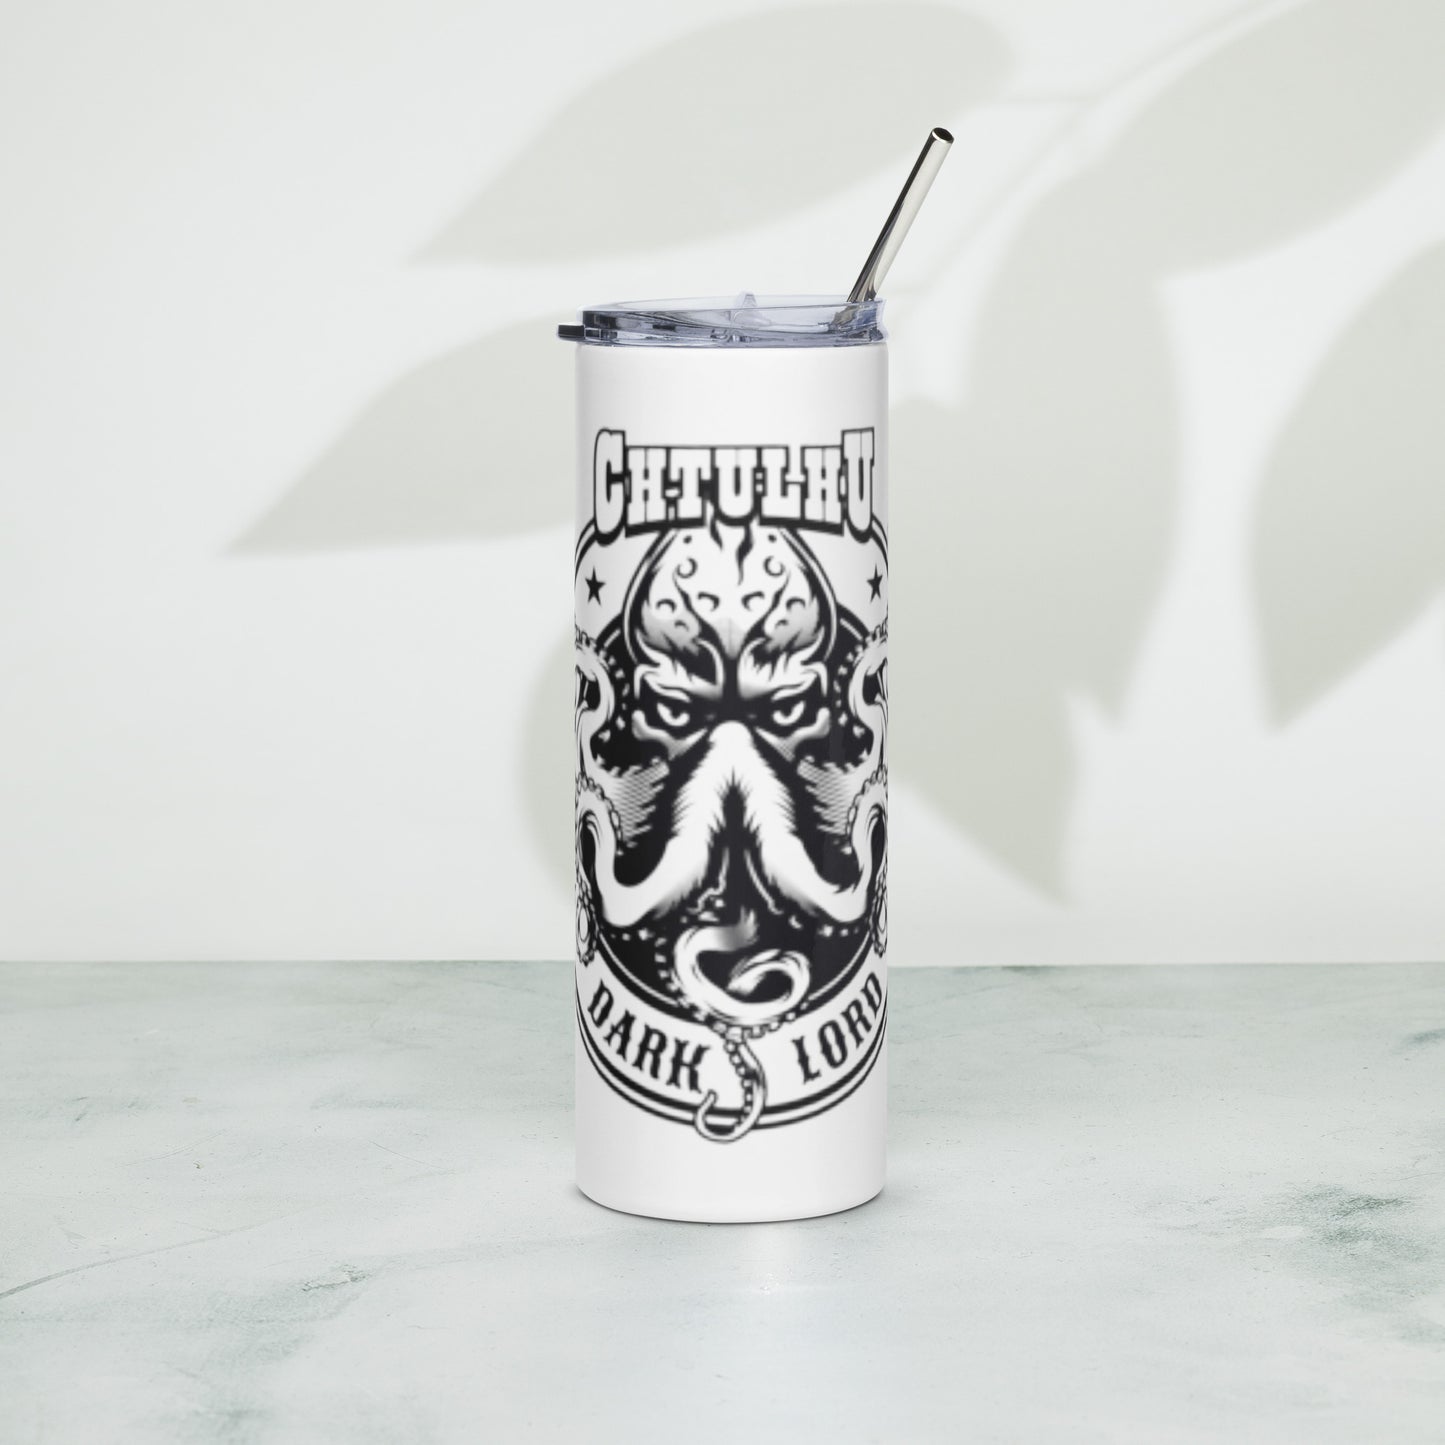 Cthulhu Stainless steel tumbler